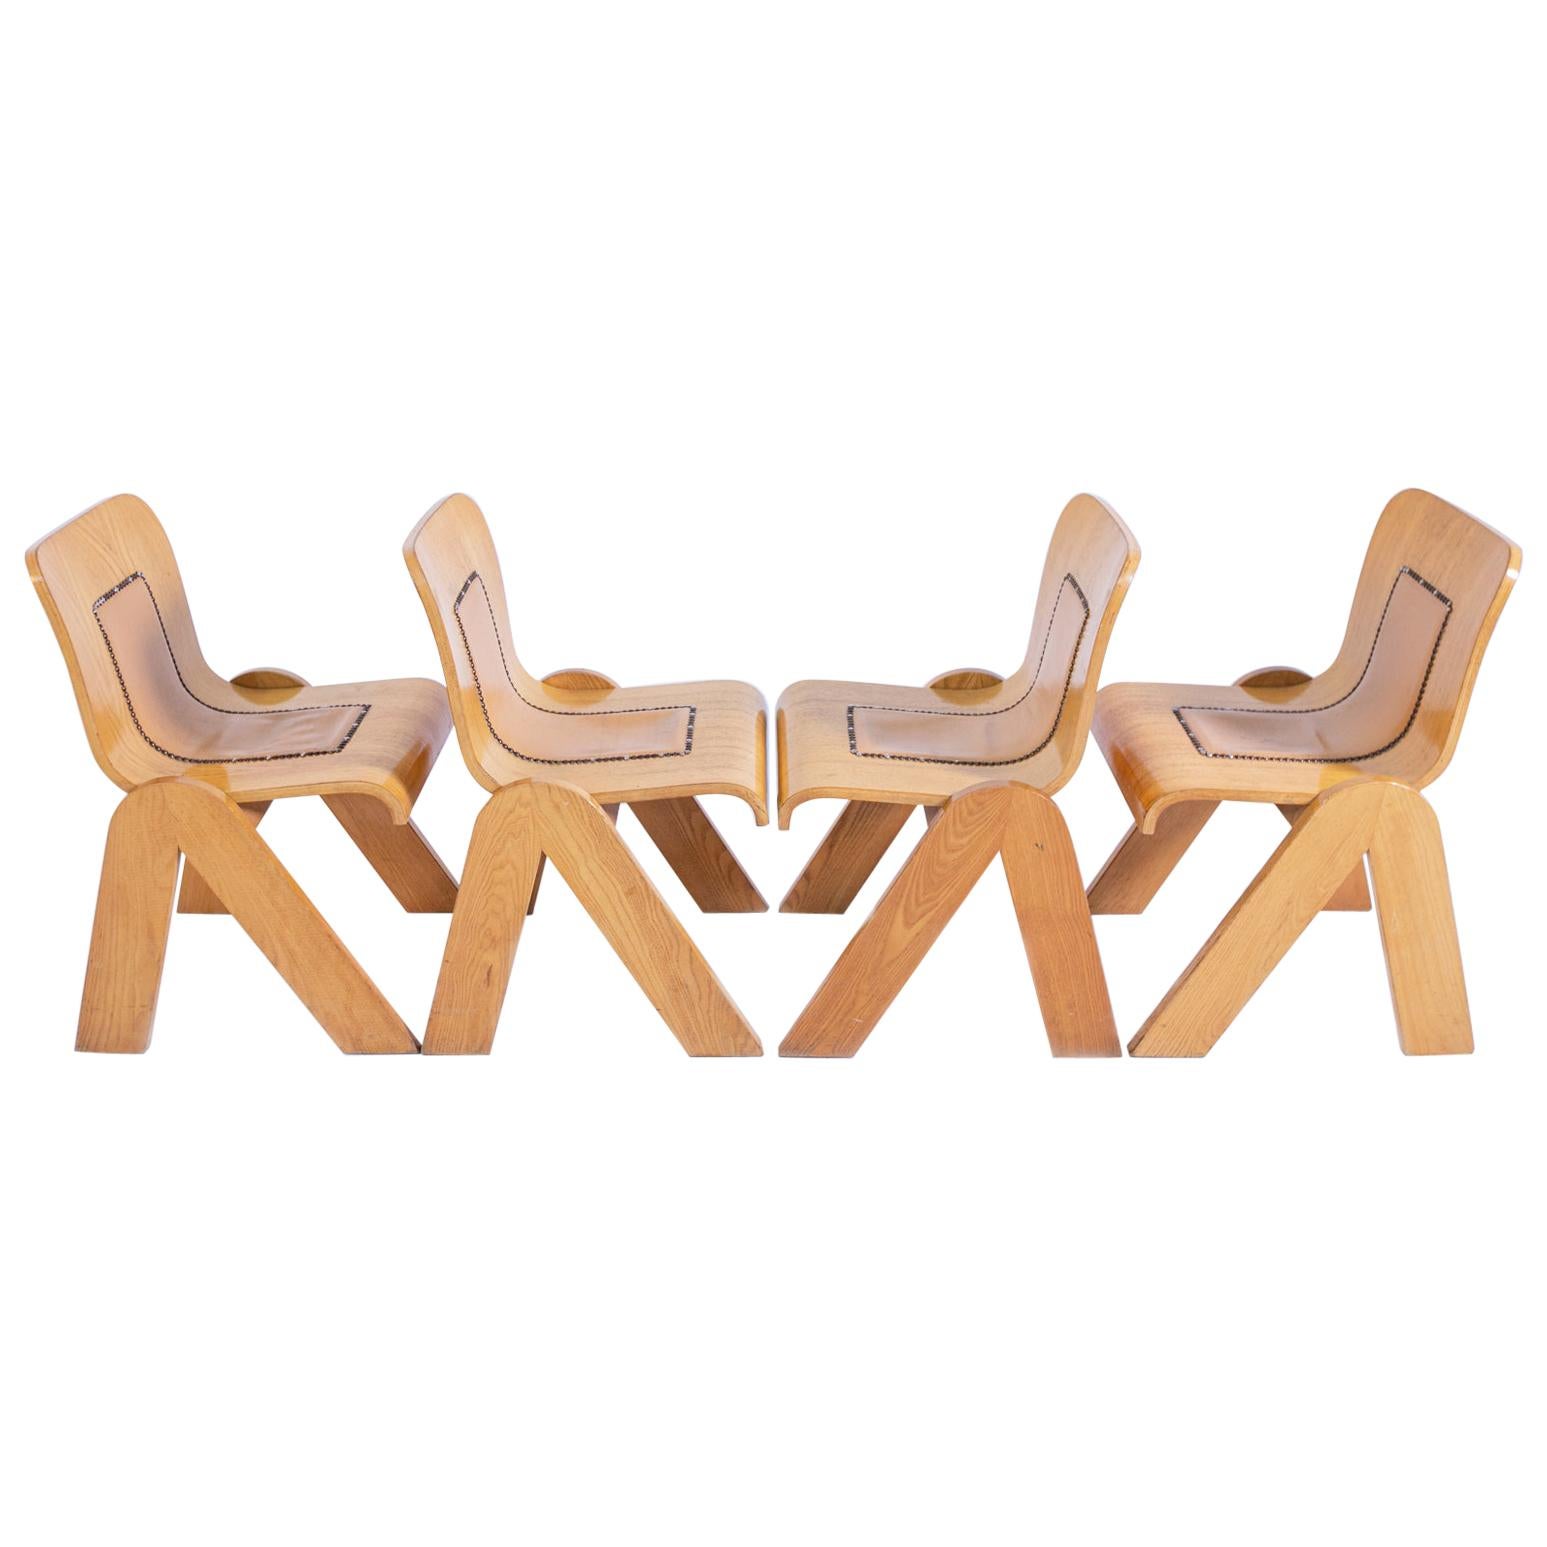 Set of Four Chairs by Gigi Babadin in Wood and Leather, 1950s